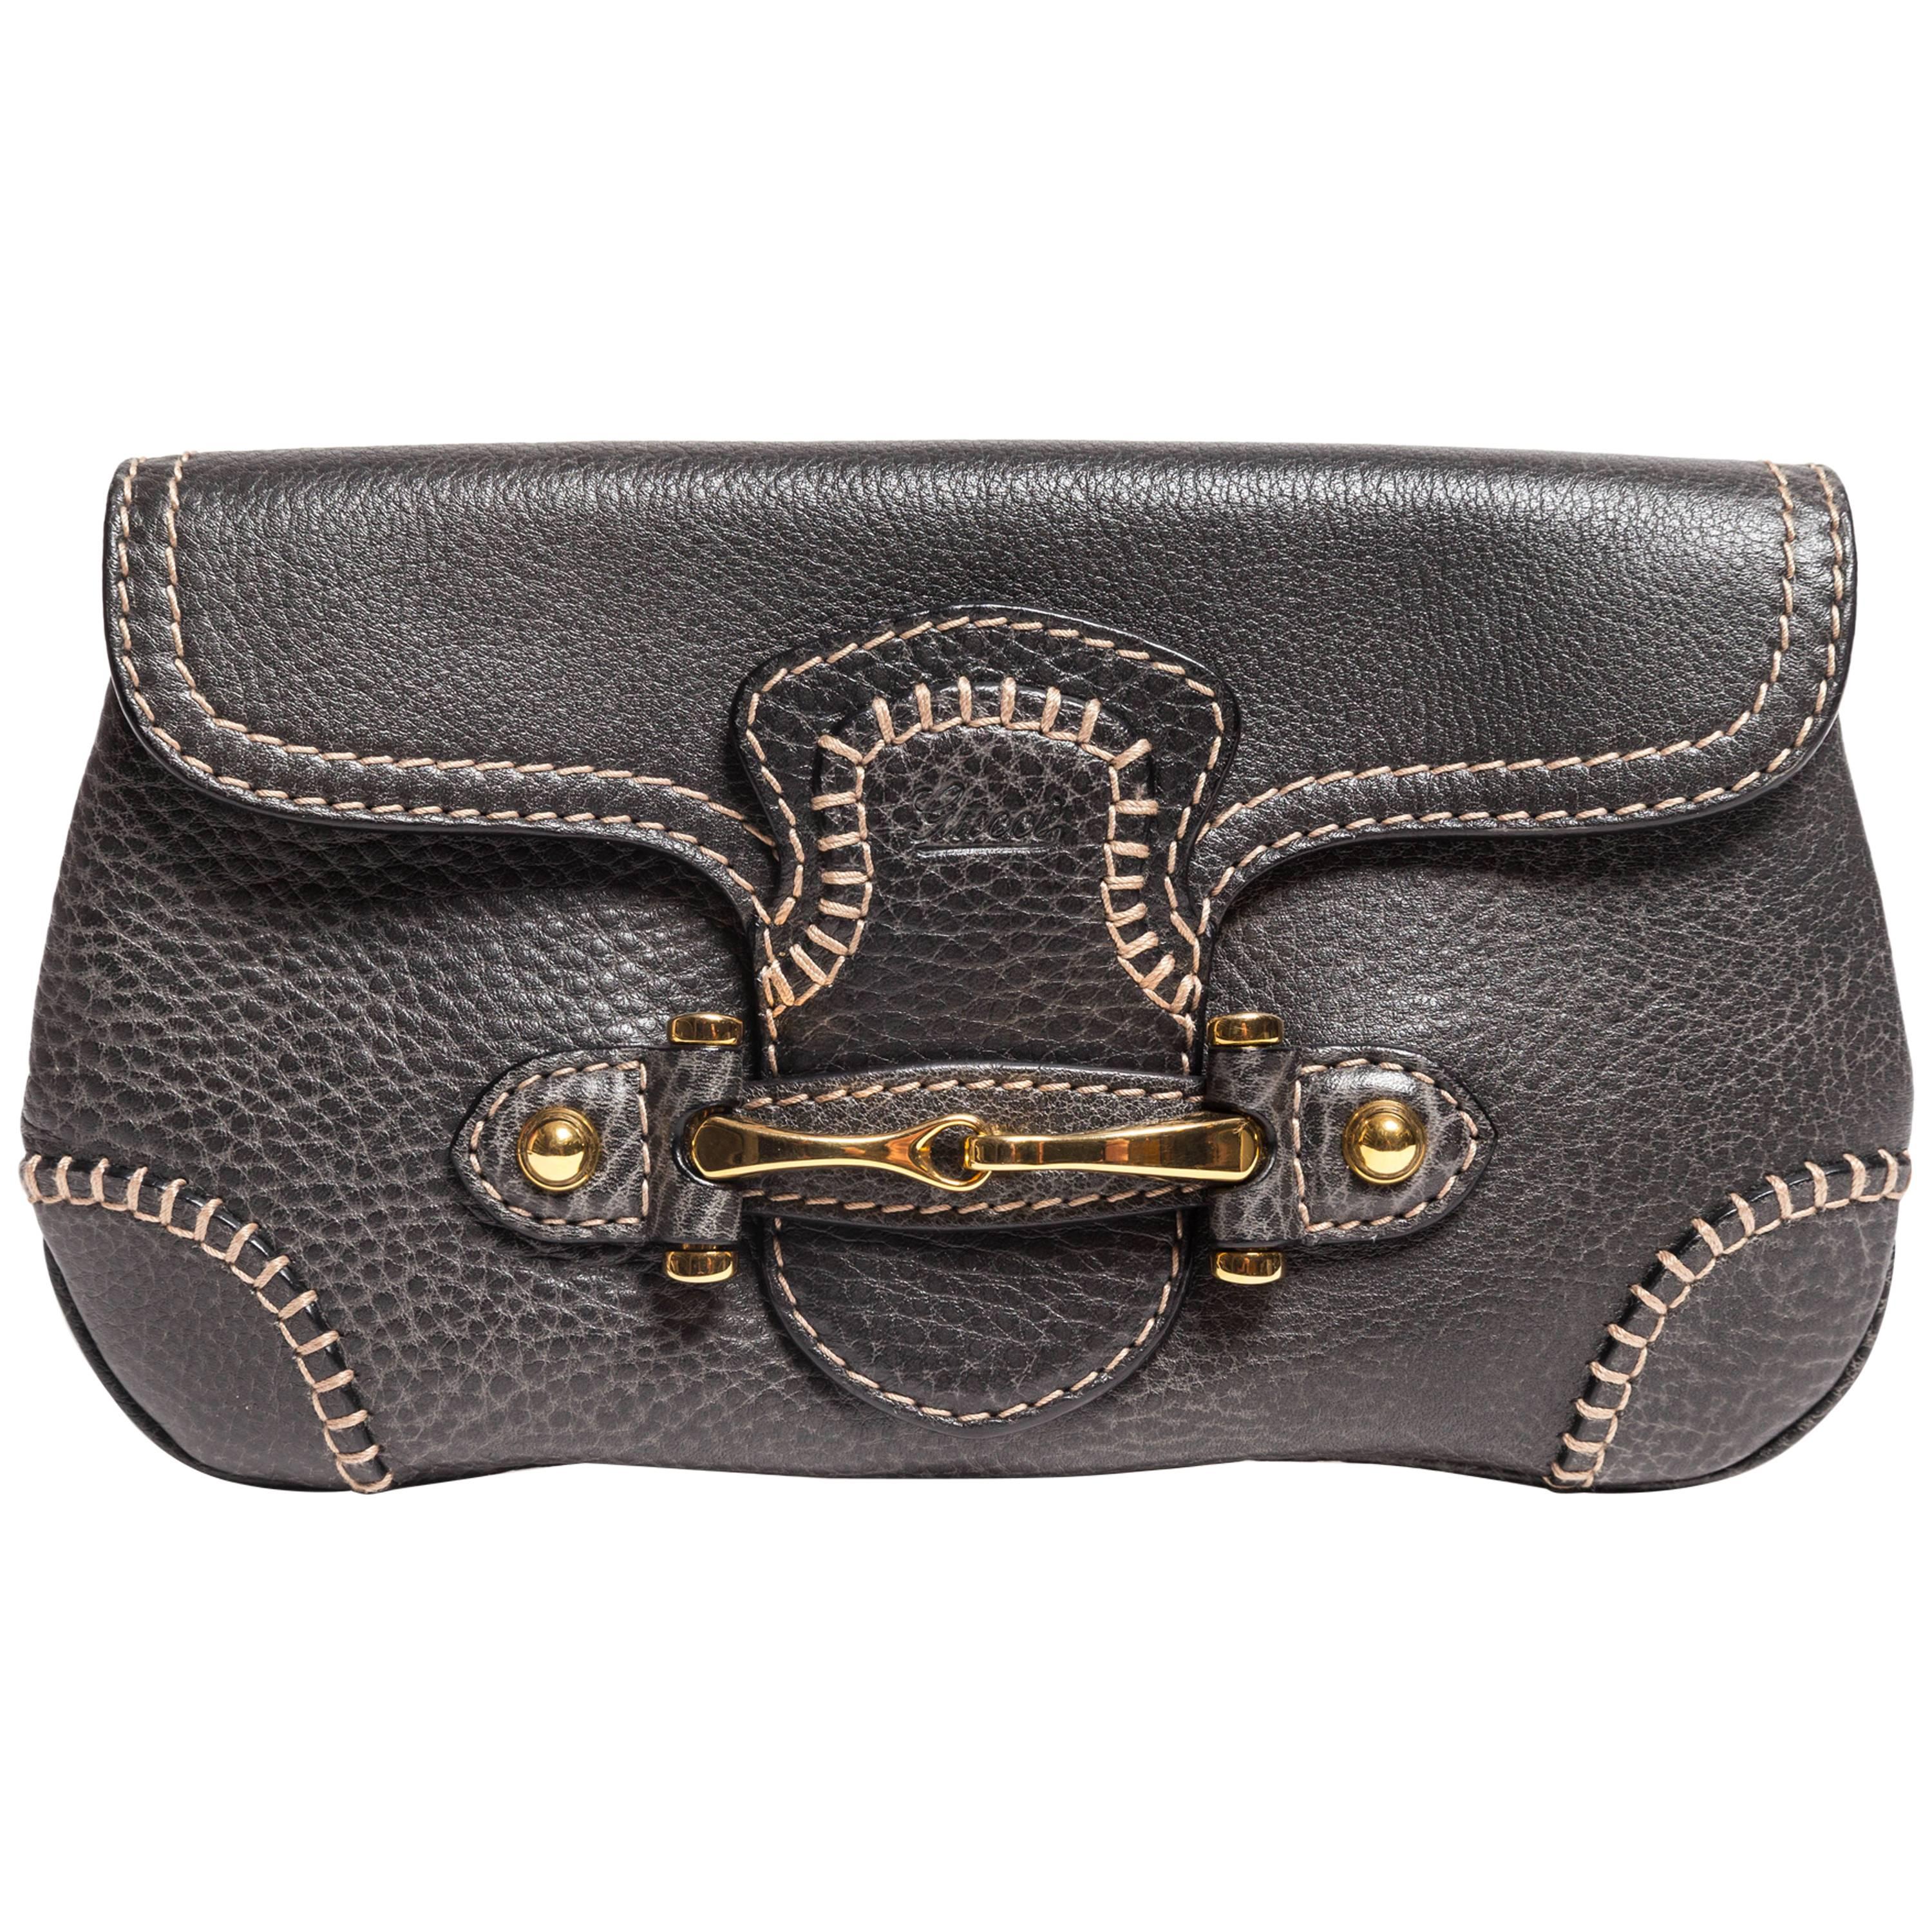  Pebbled Leather Gucci Clutch in Graphite Grey